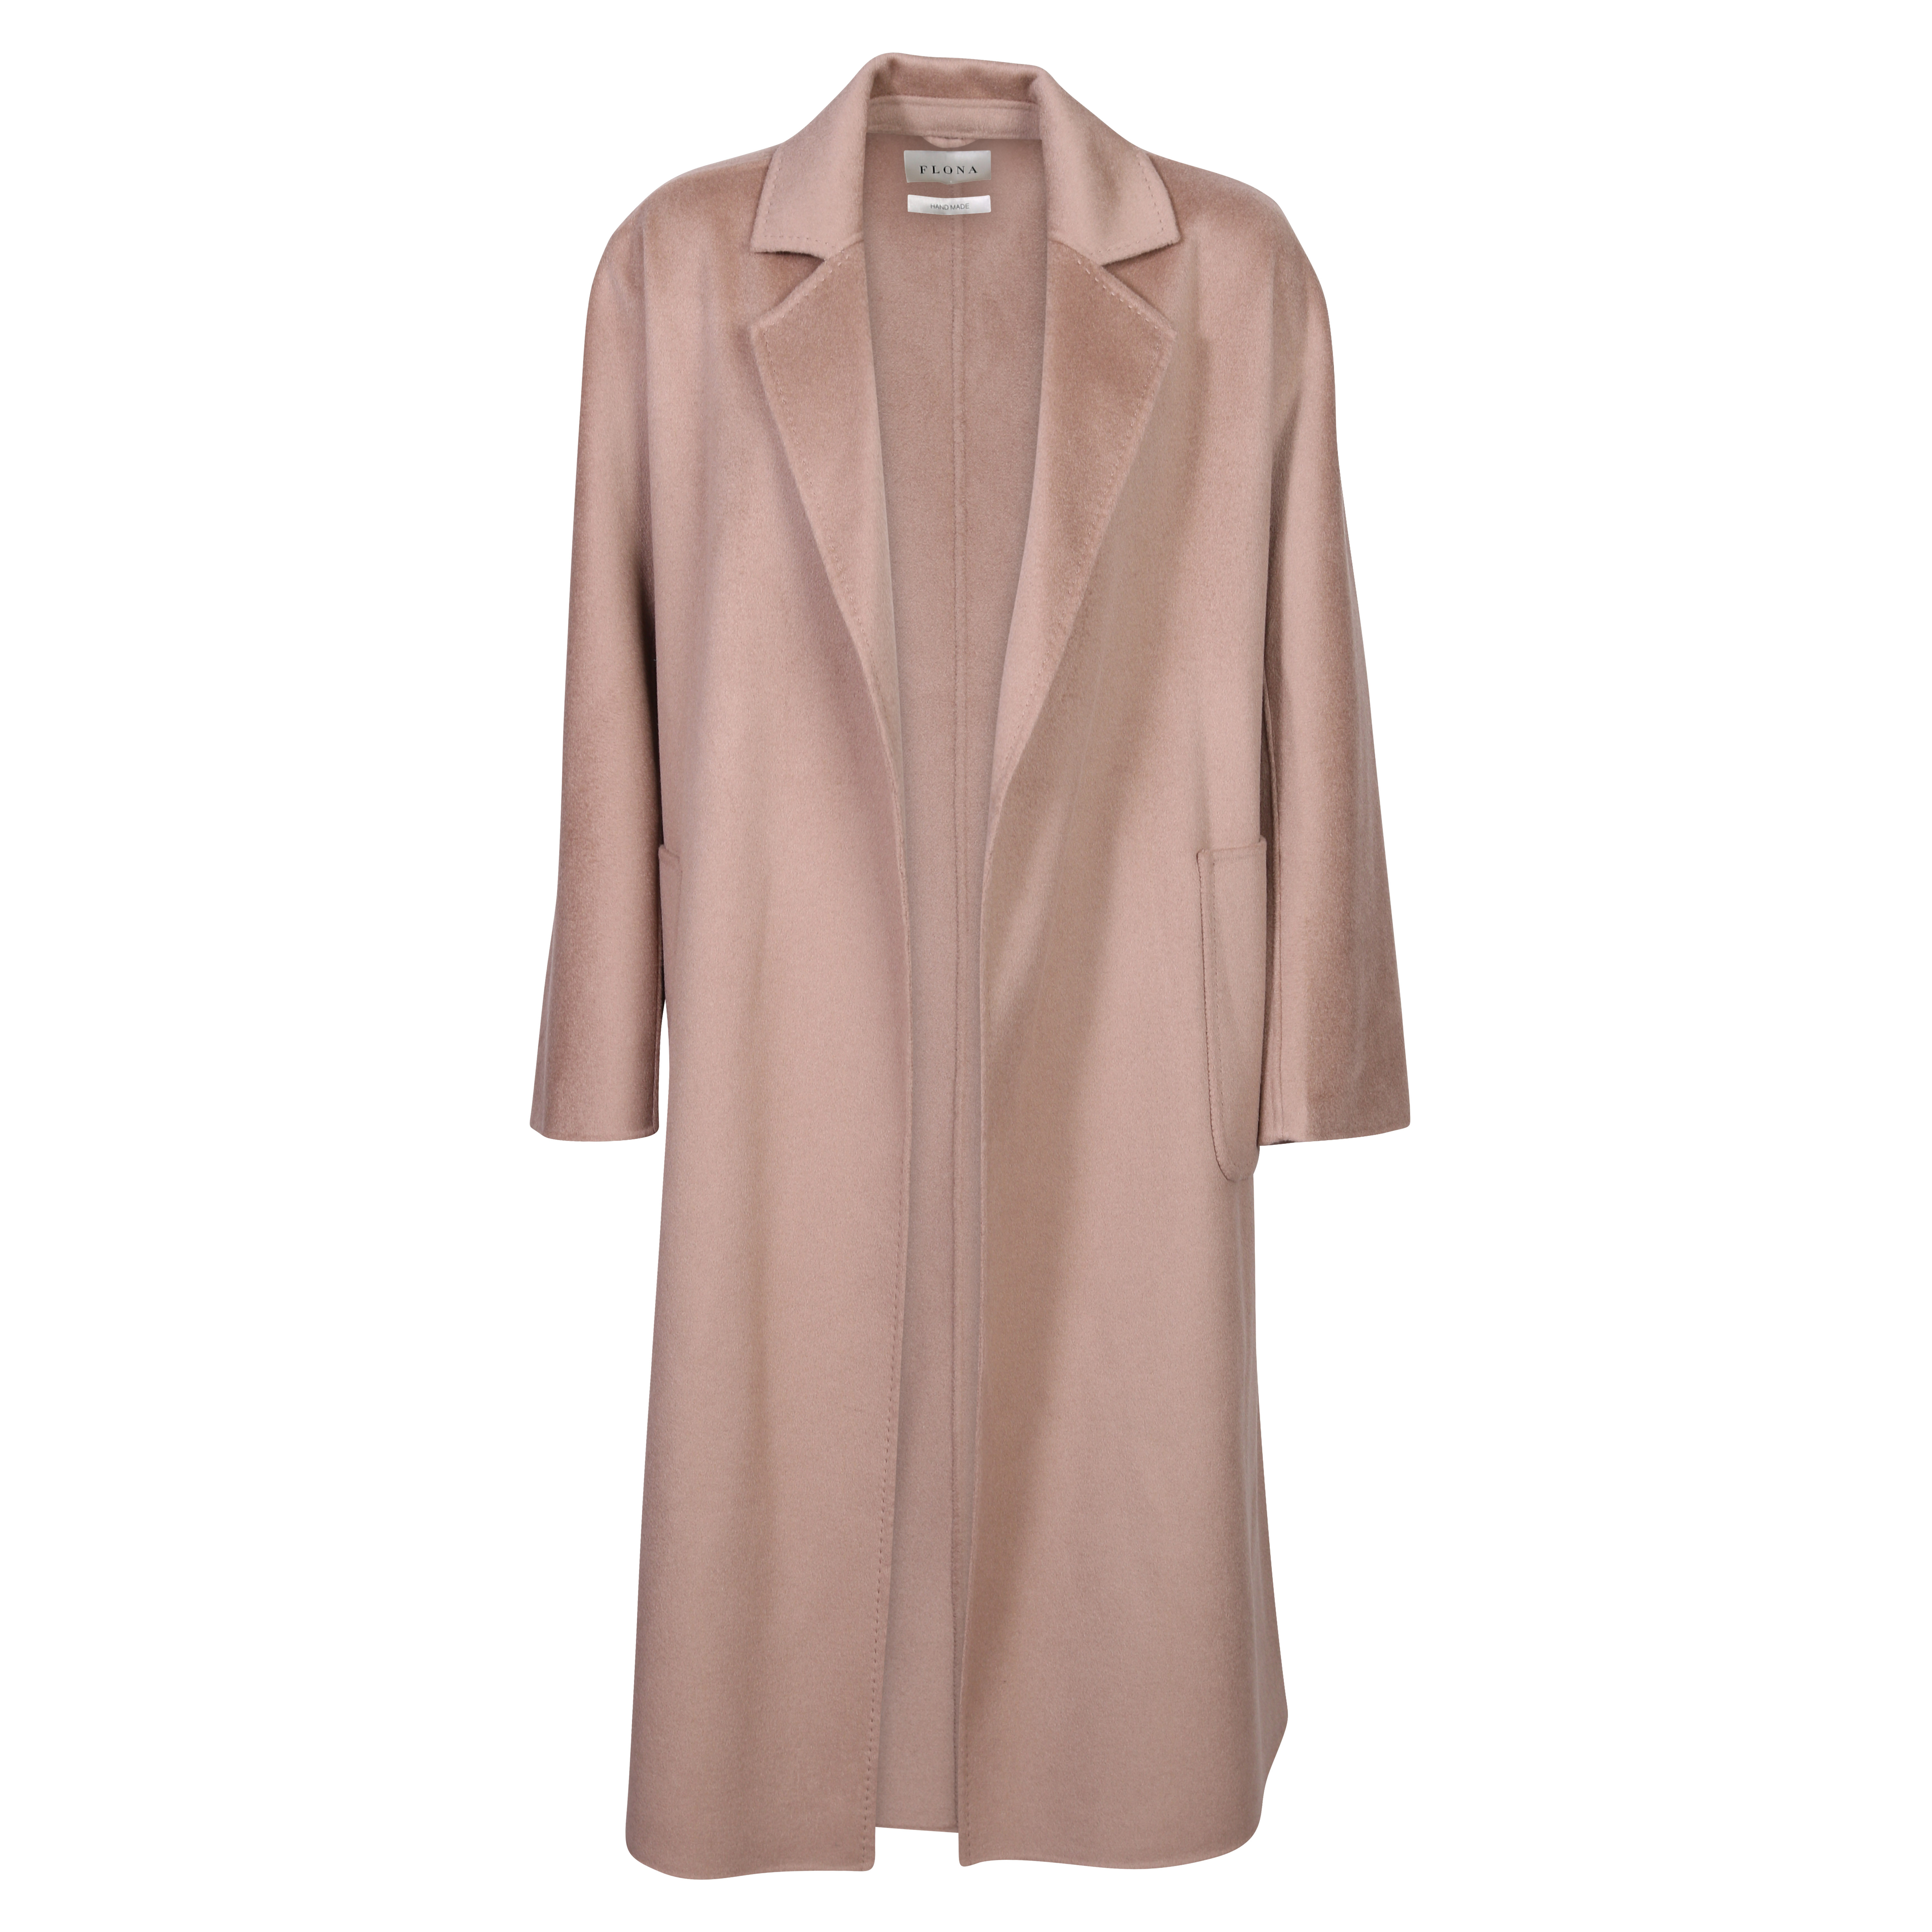 Flona Wool/Cashmere Coat in Taupe M/L